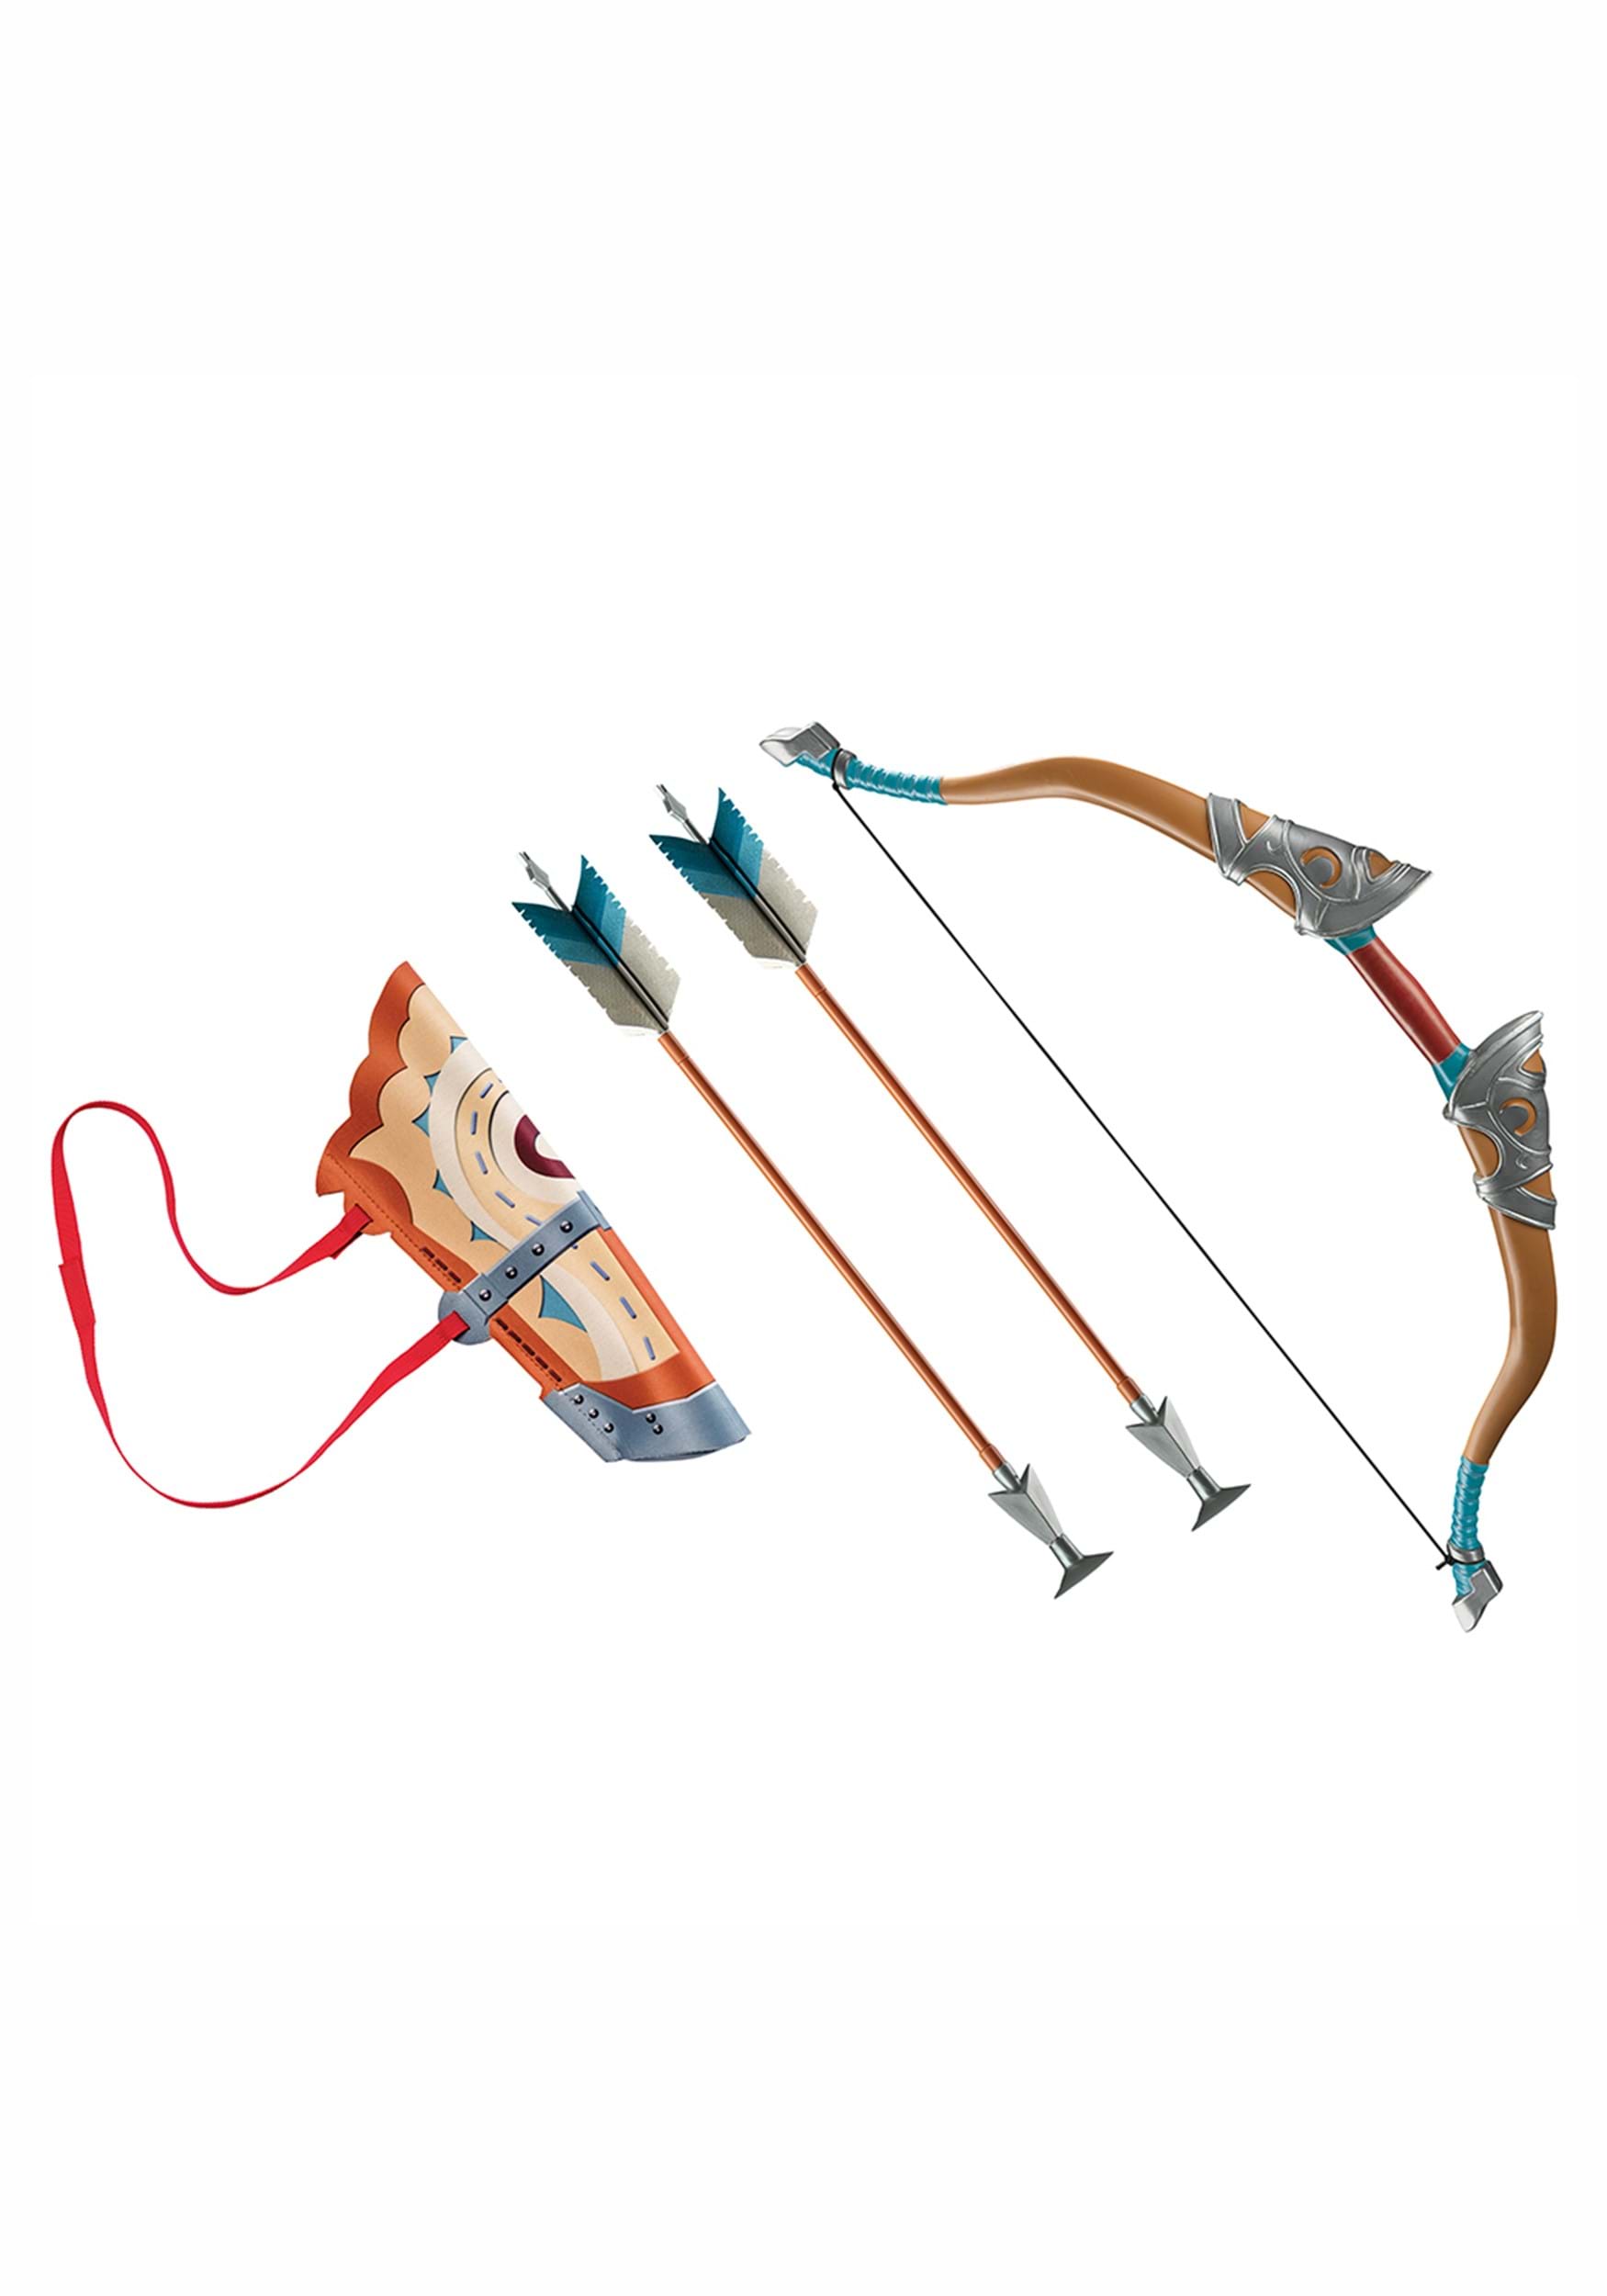 Deluxe Breath of the Wild Bow and Arrow Set